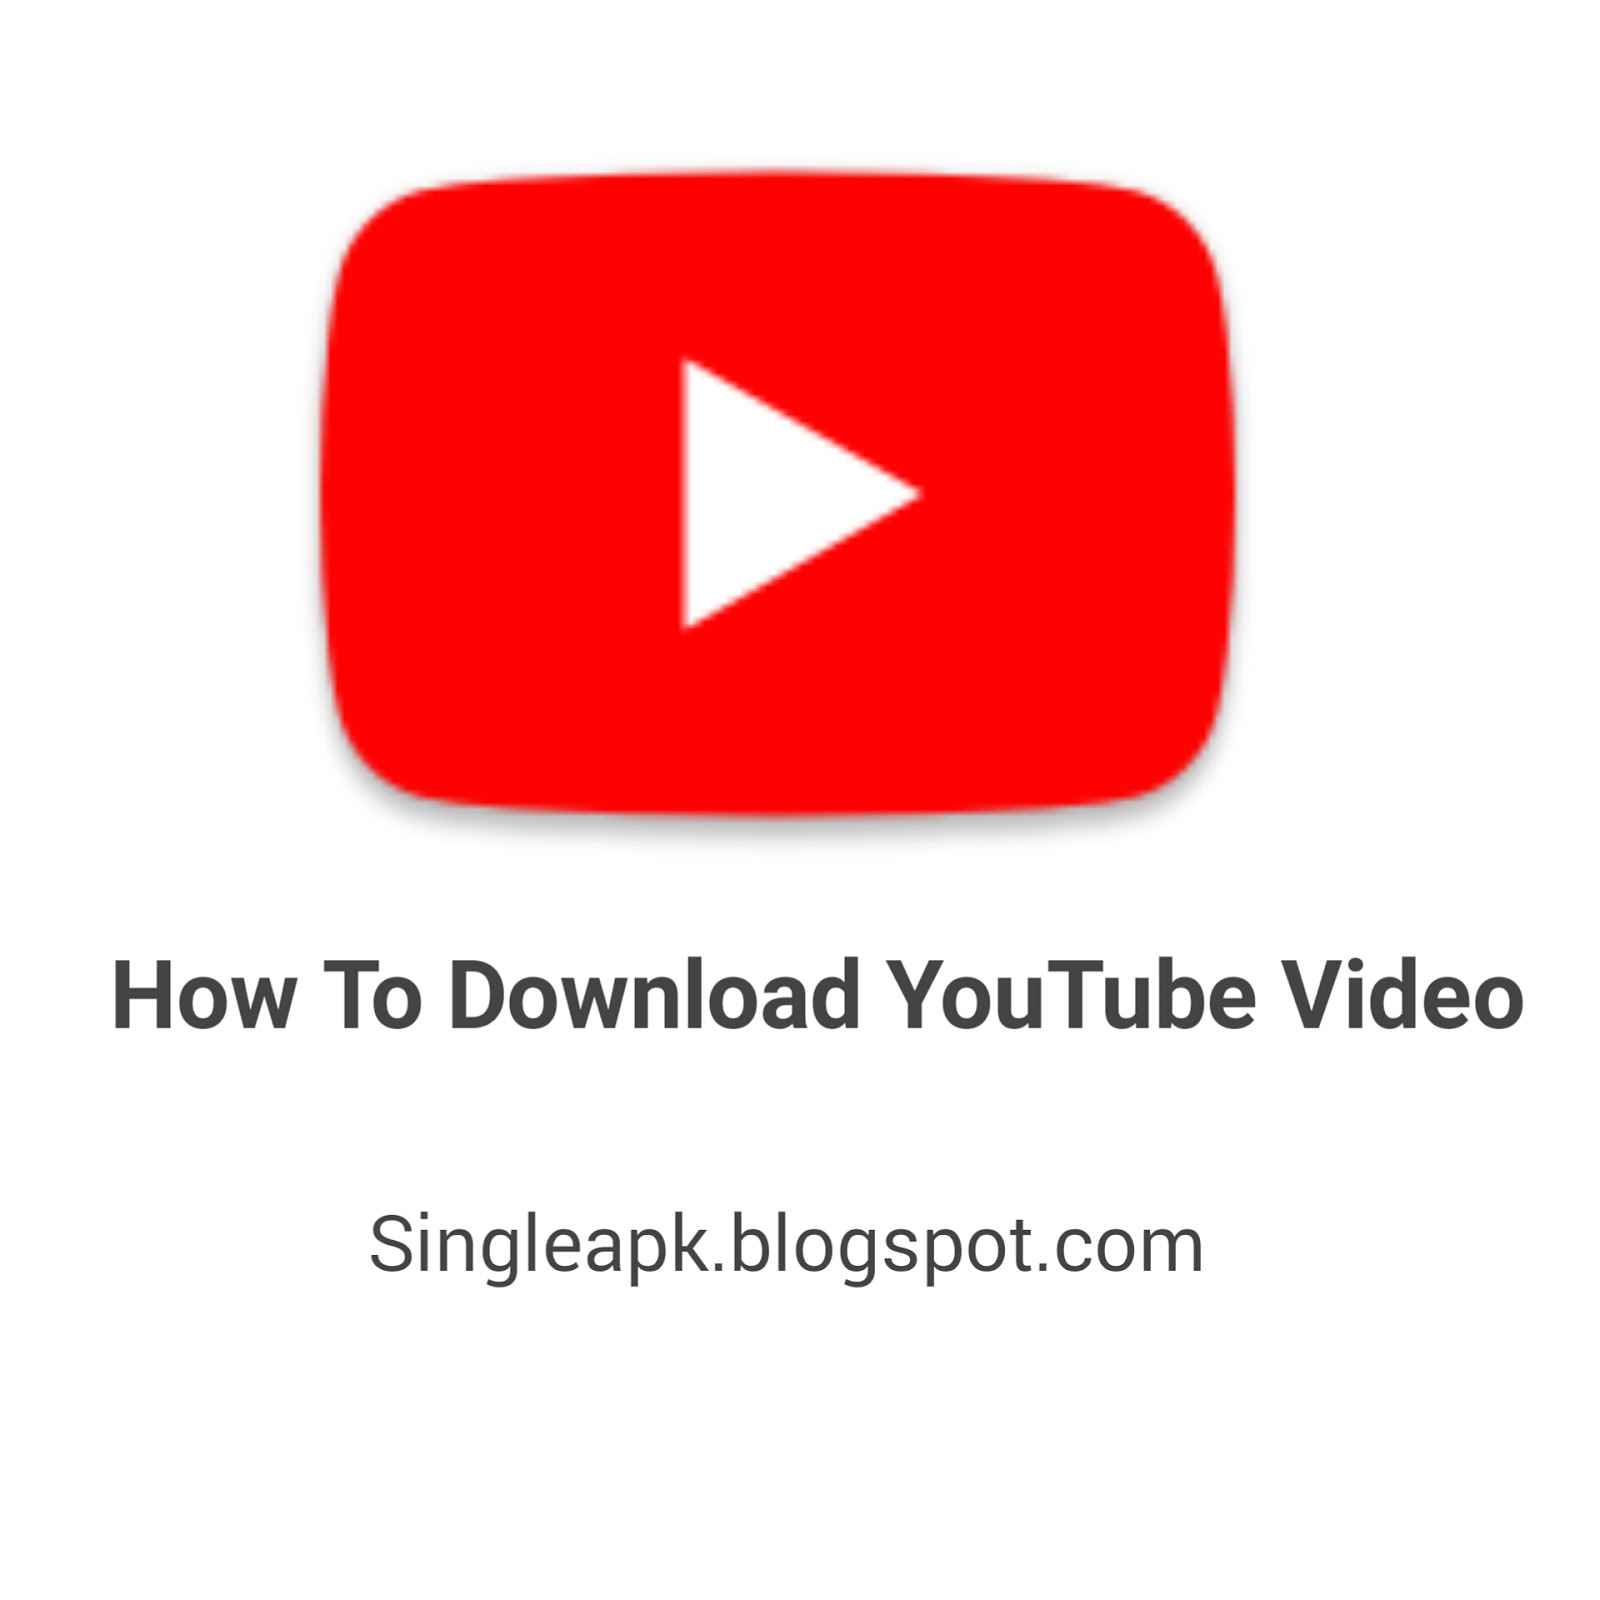 How To Download YouTube Video Without Any Payment